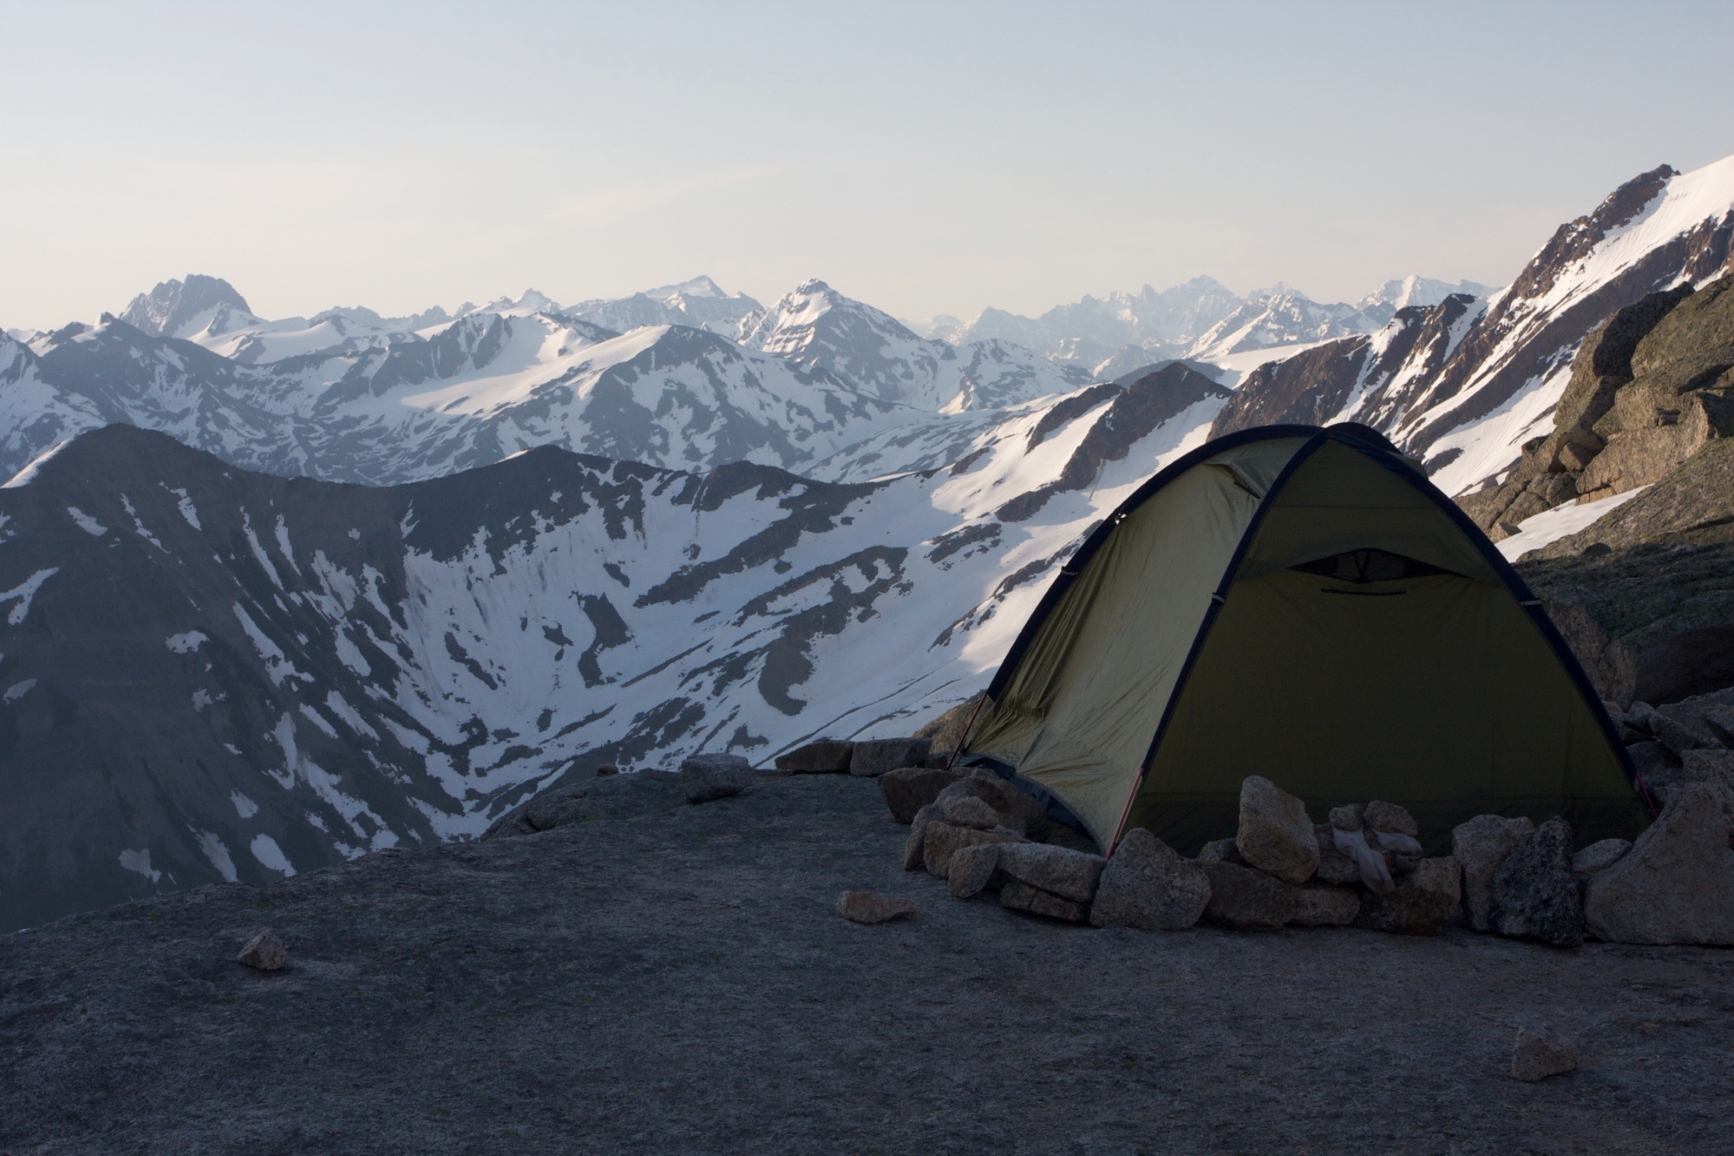 A tent on the cliffside facing the snowcapped mountains in the distance. Photo credit: Destination BC